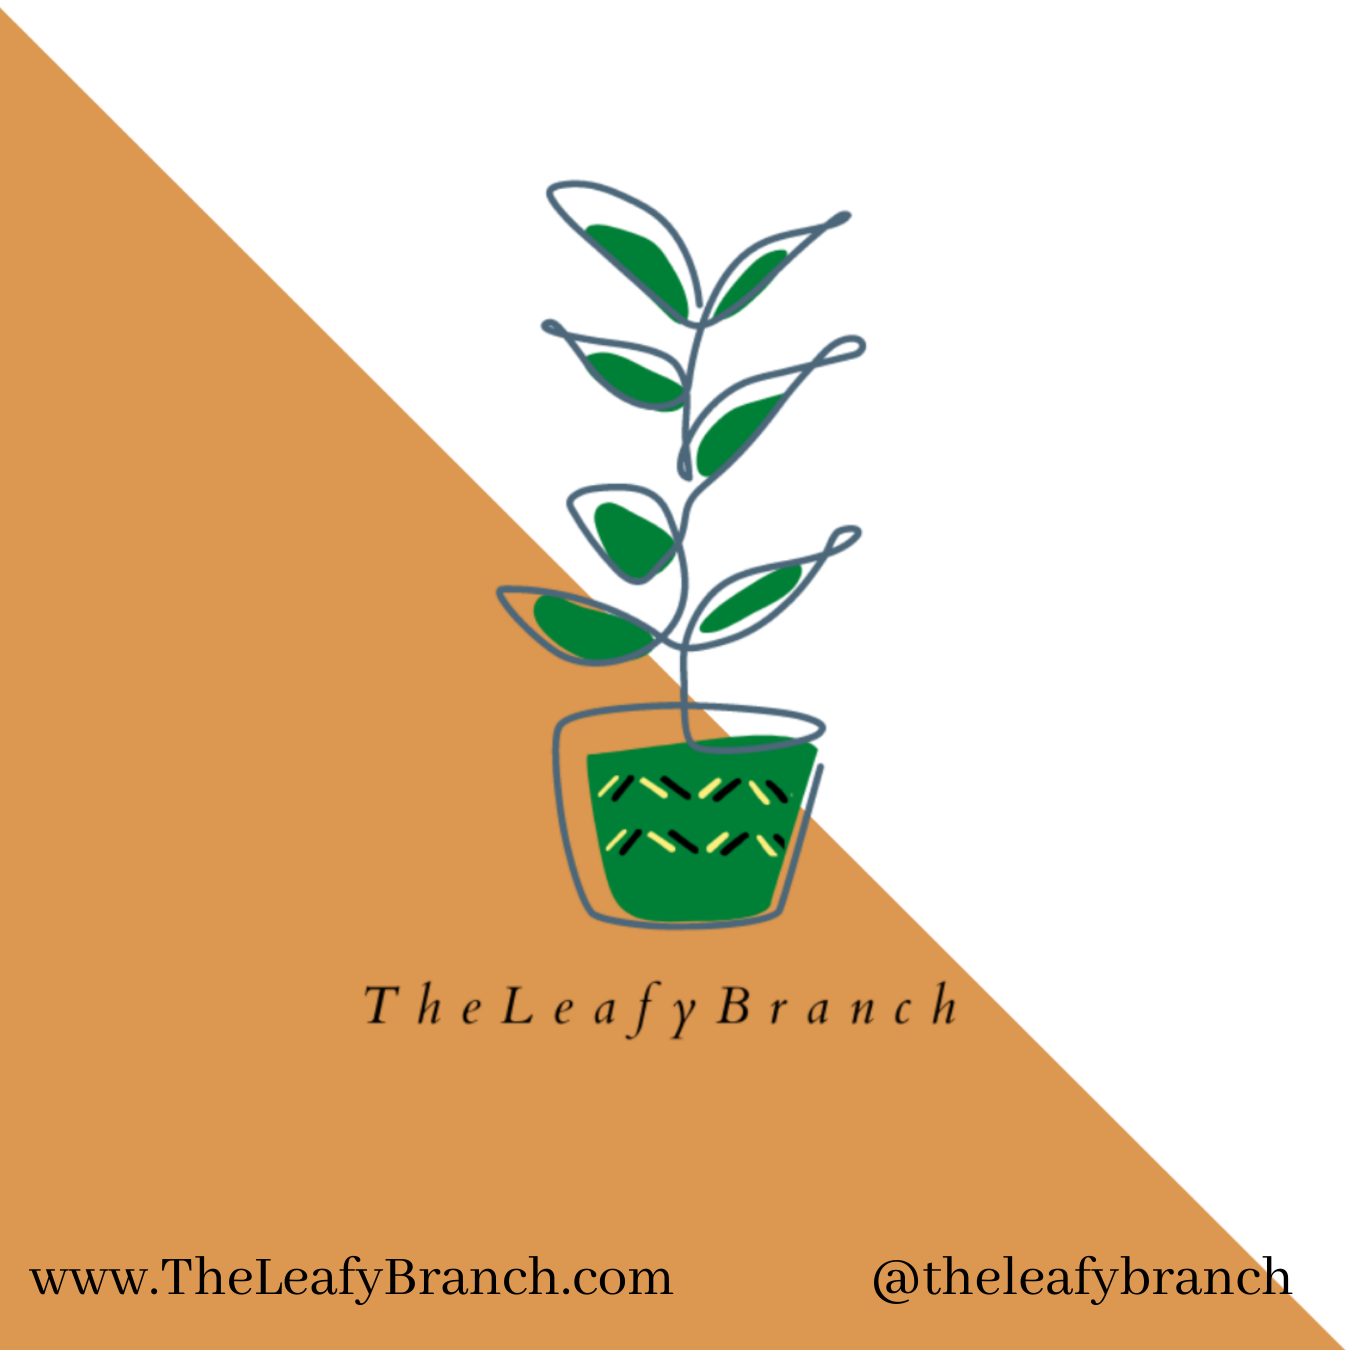 The Leafy Branch